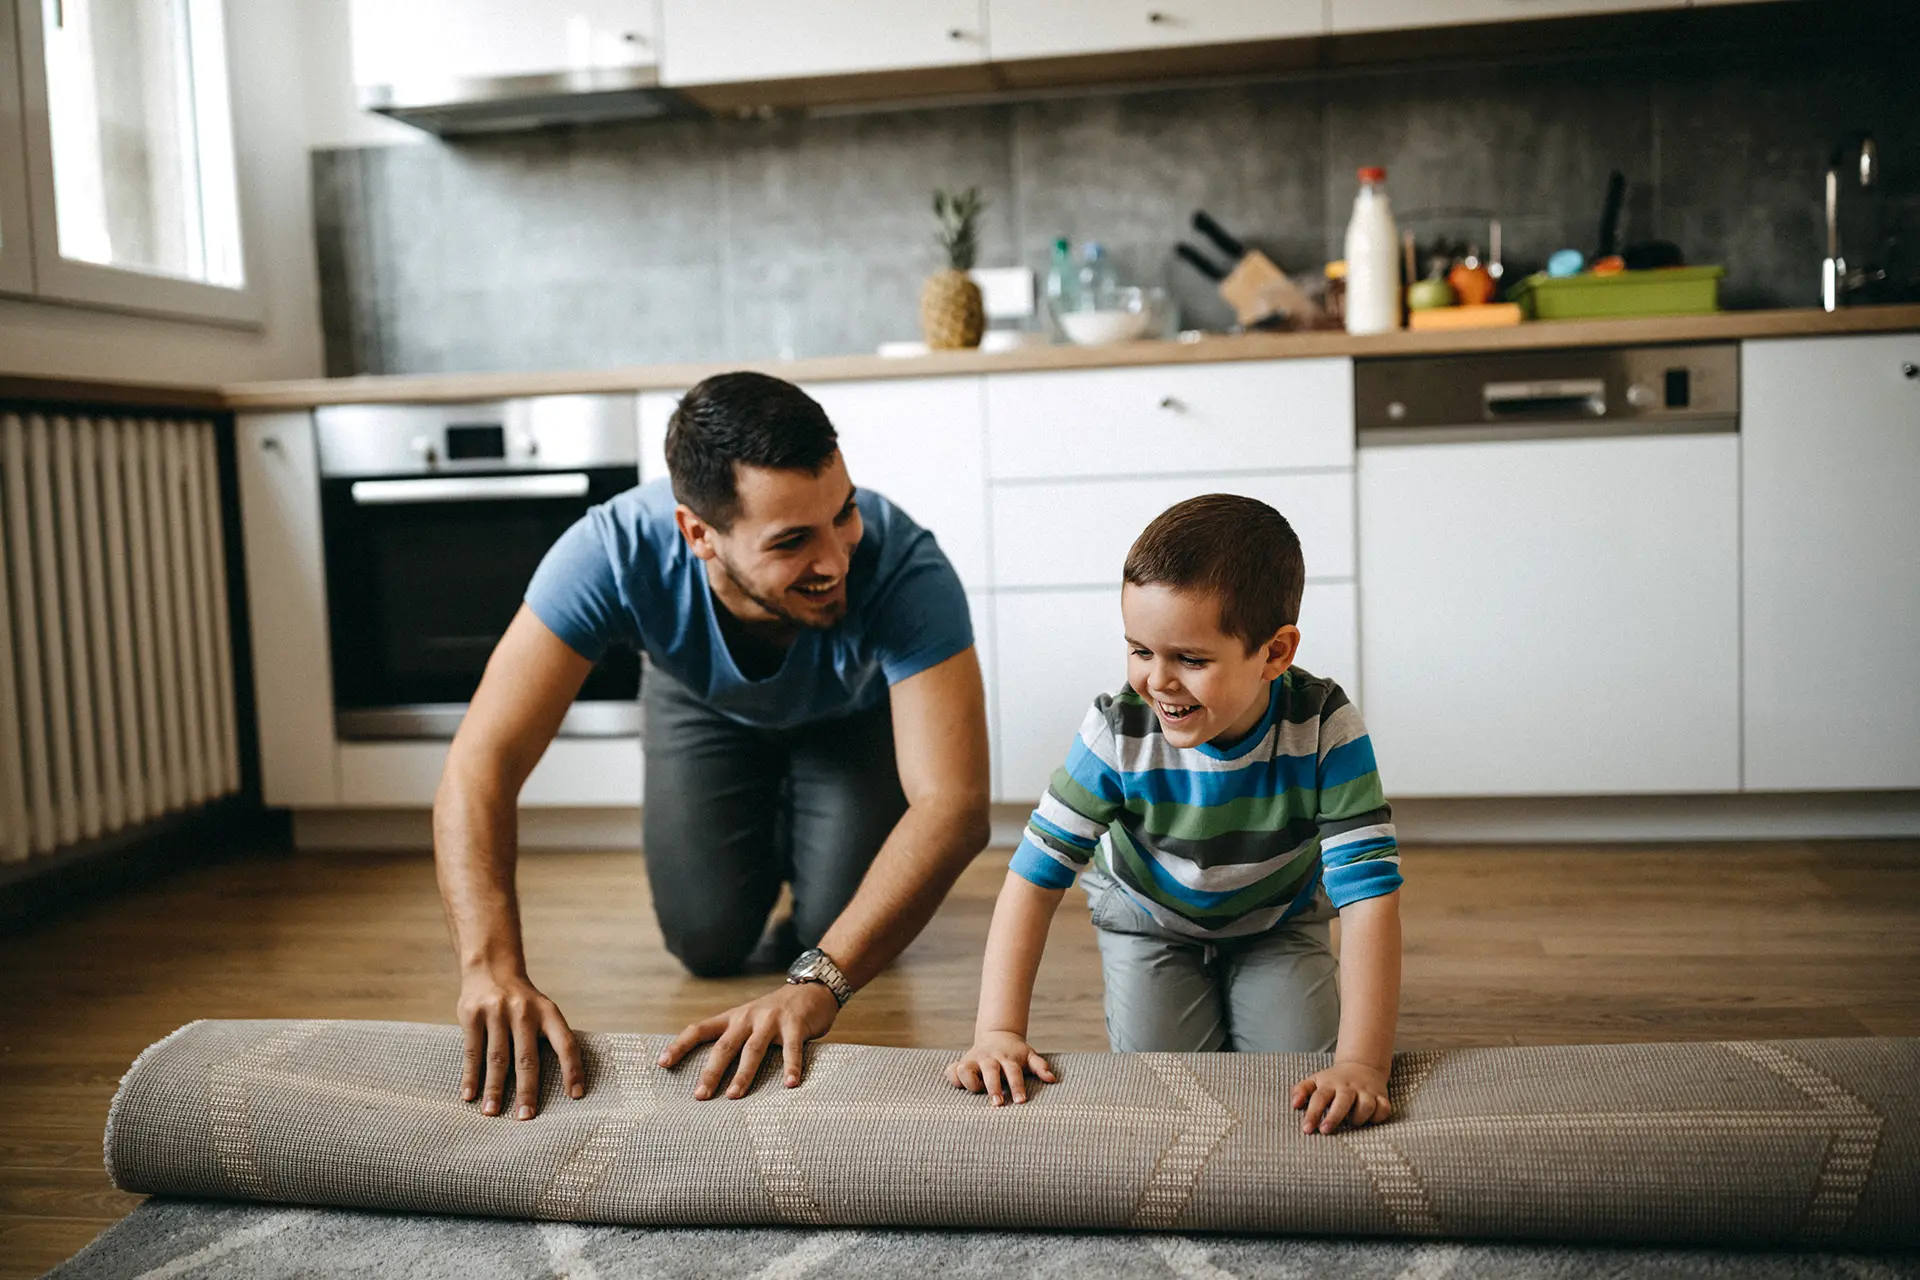 Man and his son having fun unrolling a new rug on their apartment floor.